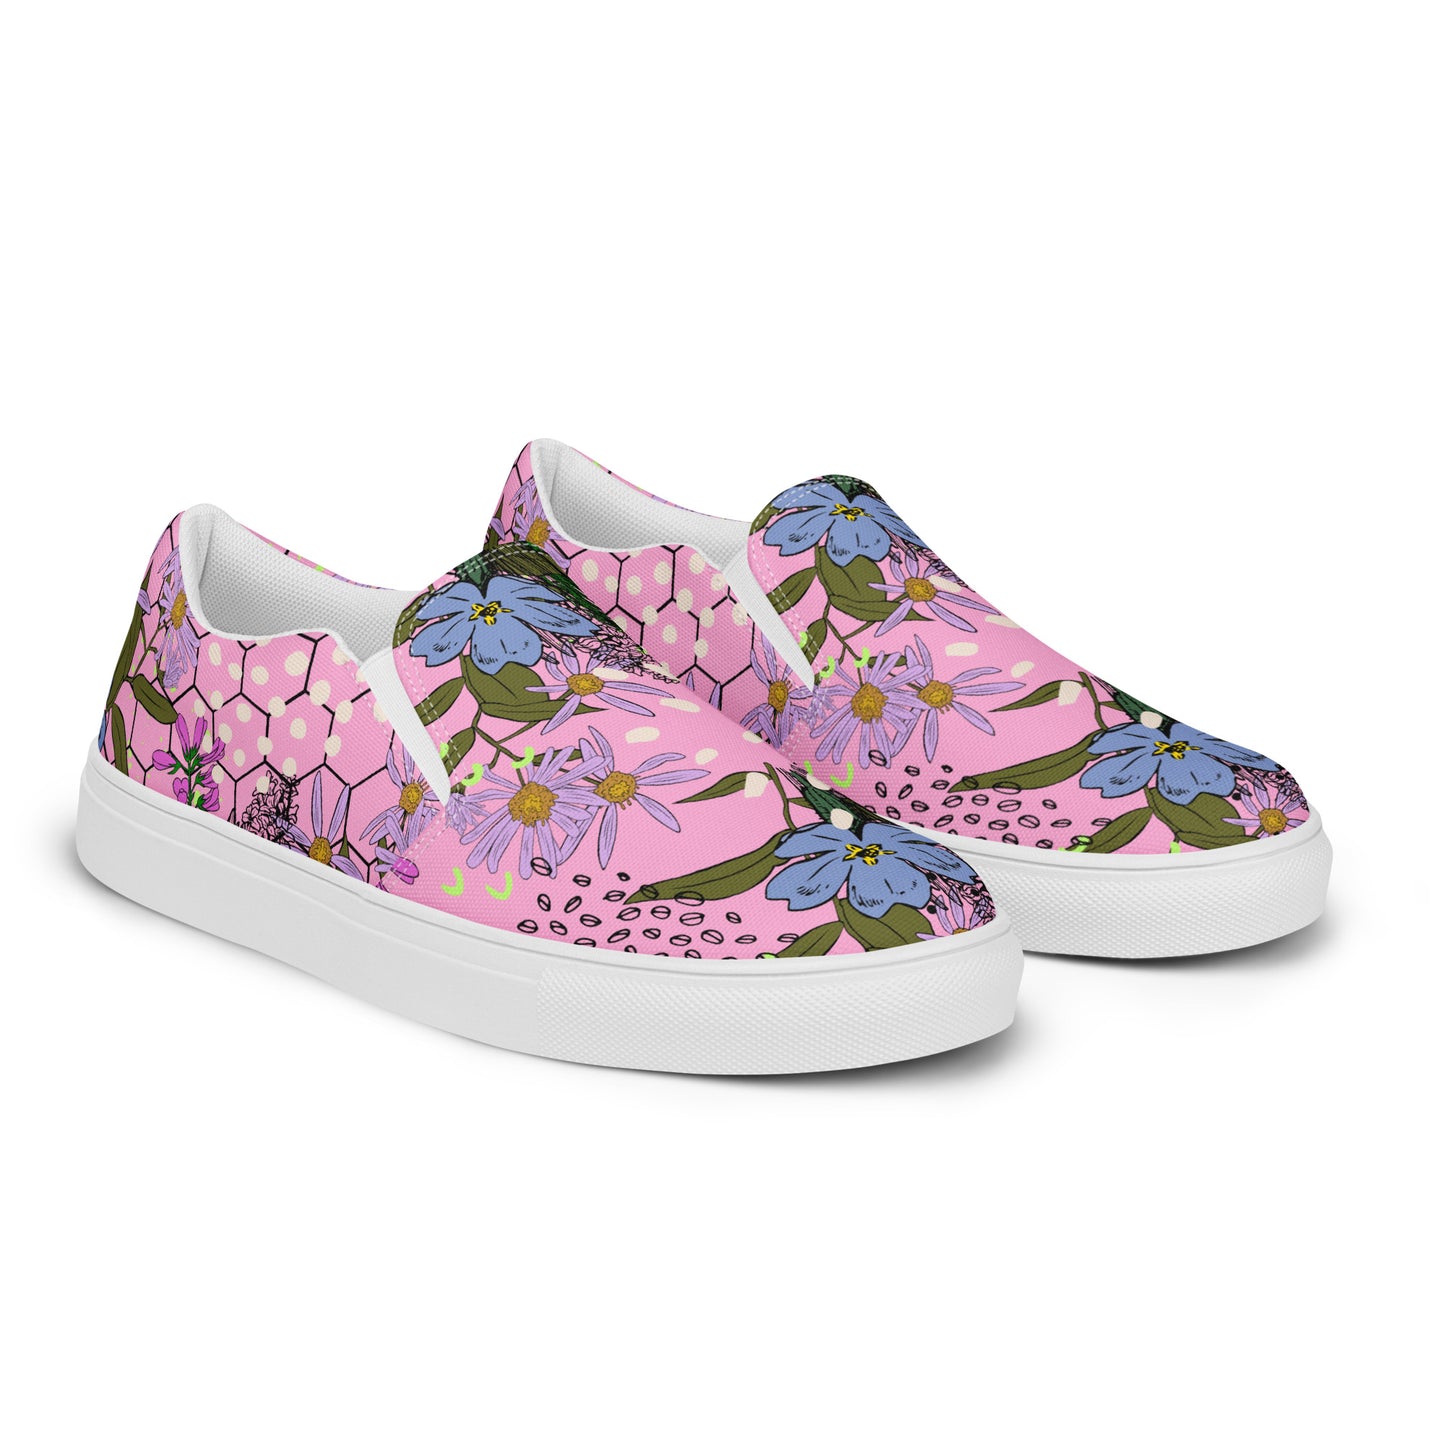 Coral Blossom Women’s slip-on canvas shoes